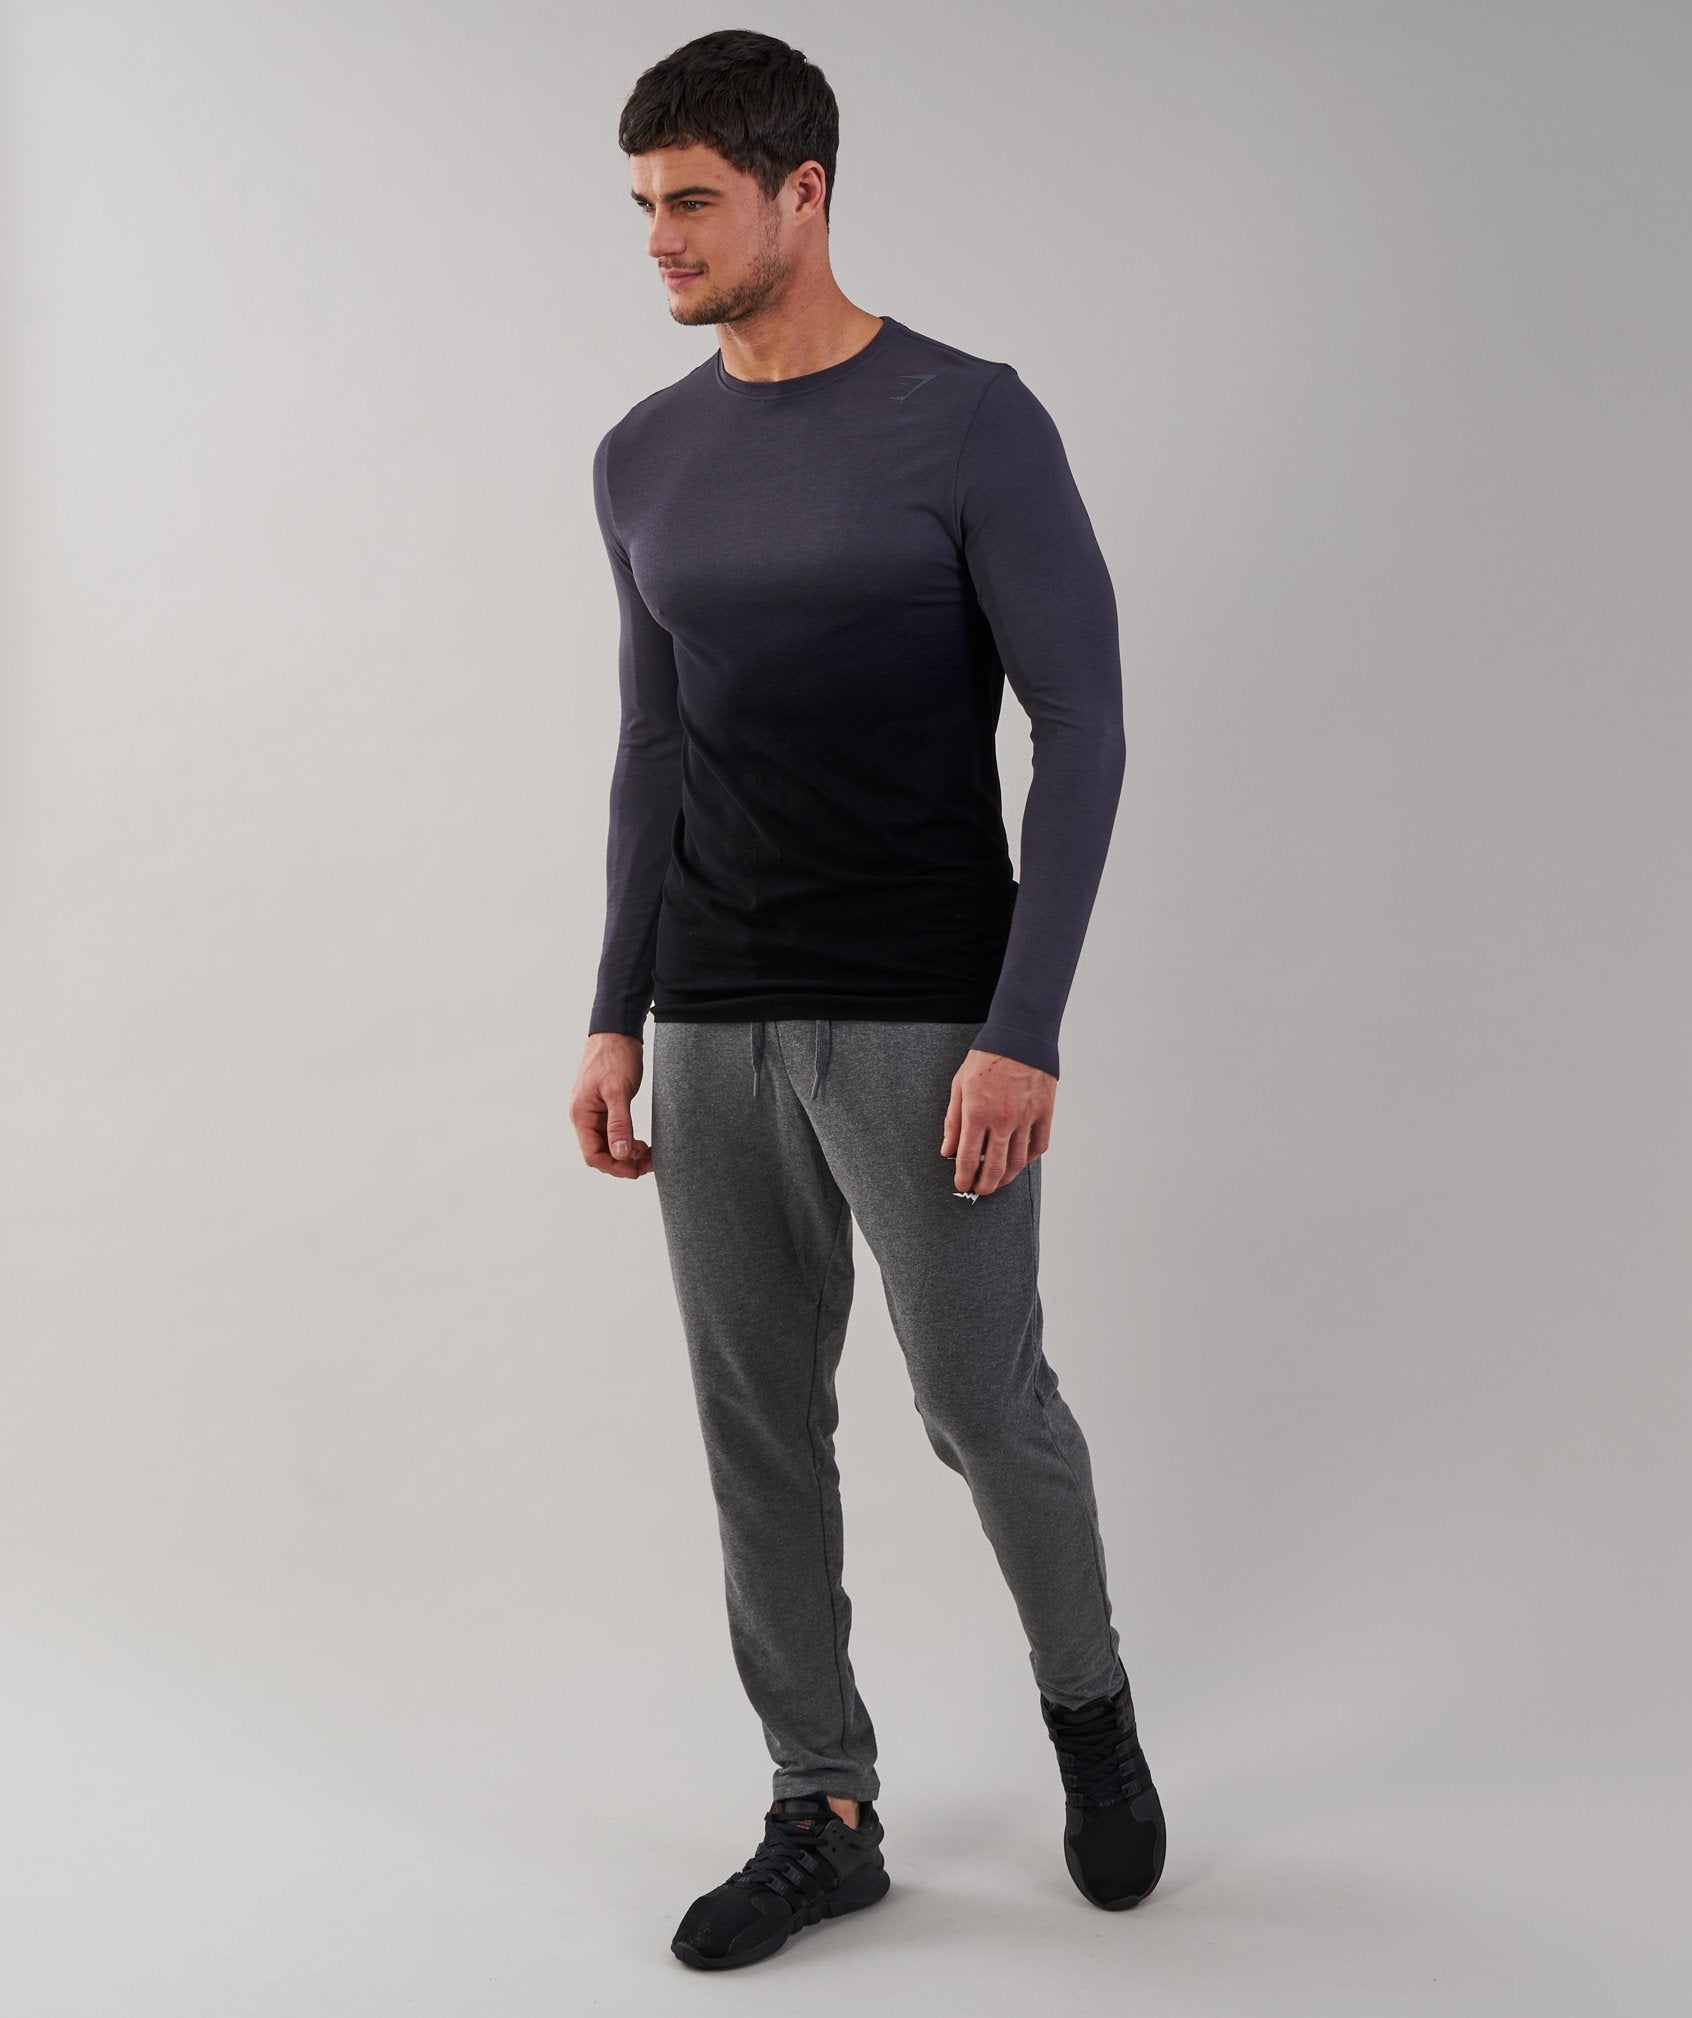 Ombre Long Sleeve T-Shirt in Charcoal/Black - view 4